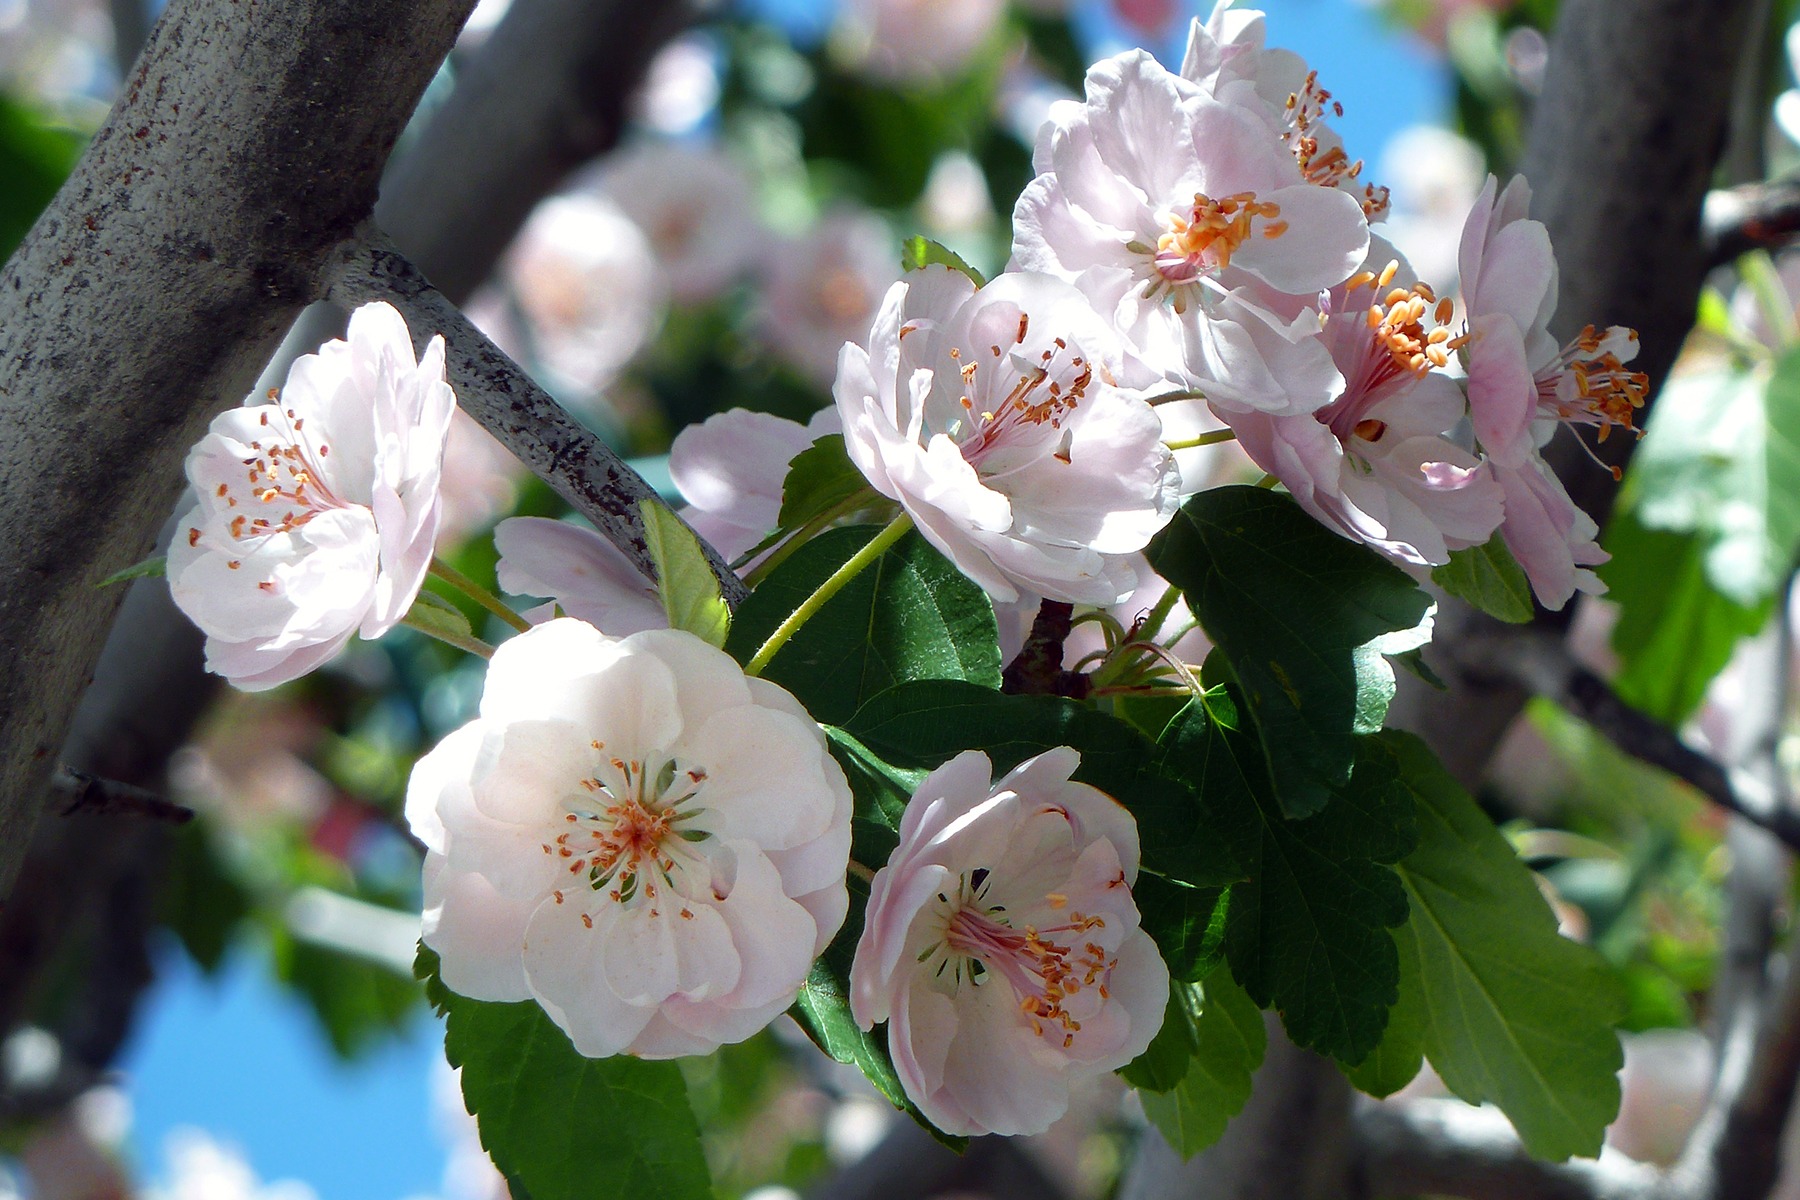 51408 download wallpaper flowers, cherry, wood, tree, bloom, flowering, branch screensavers and pictures for free